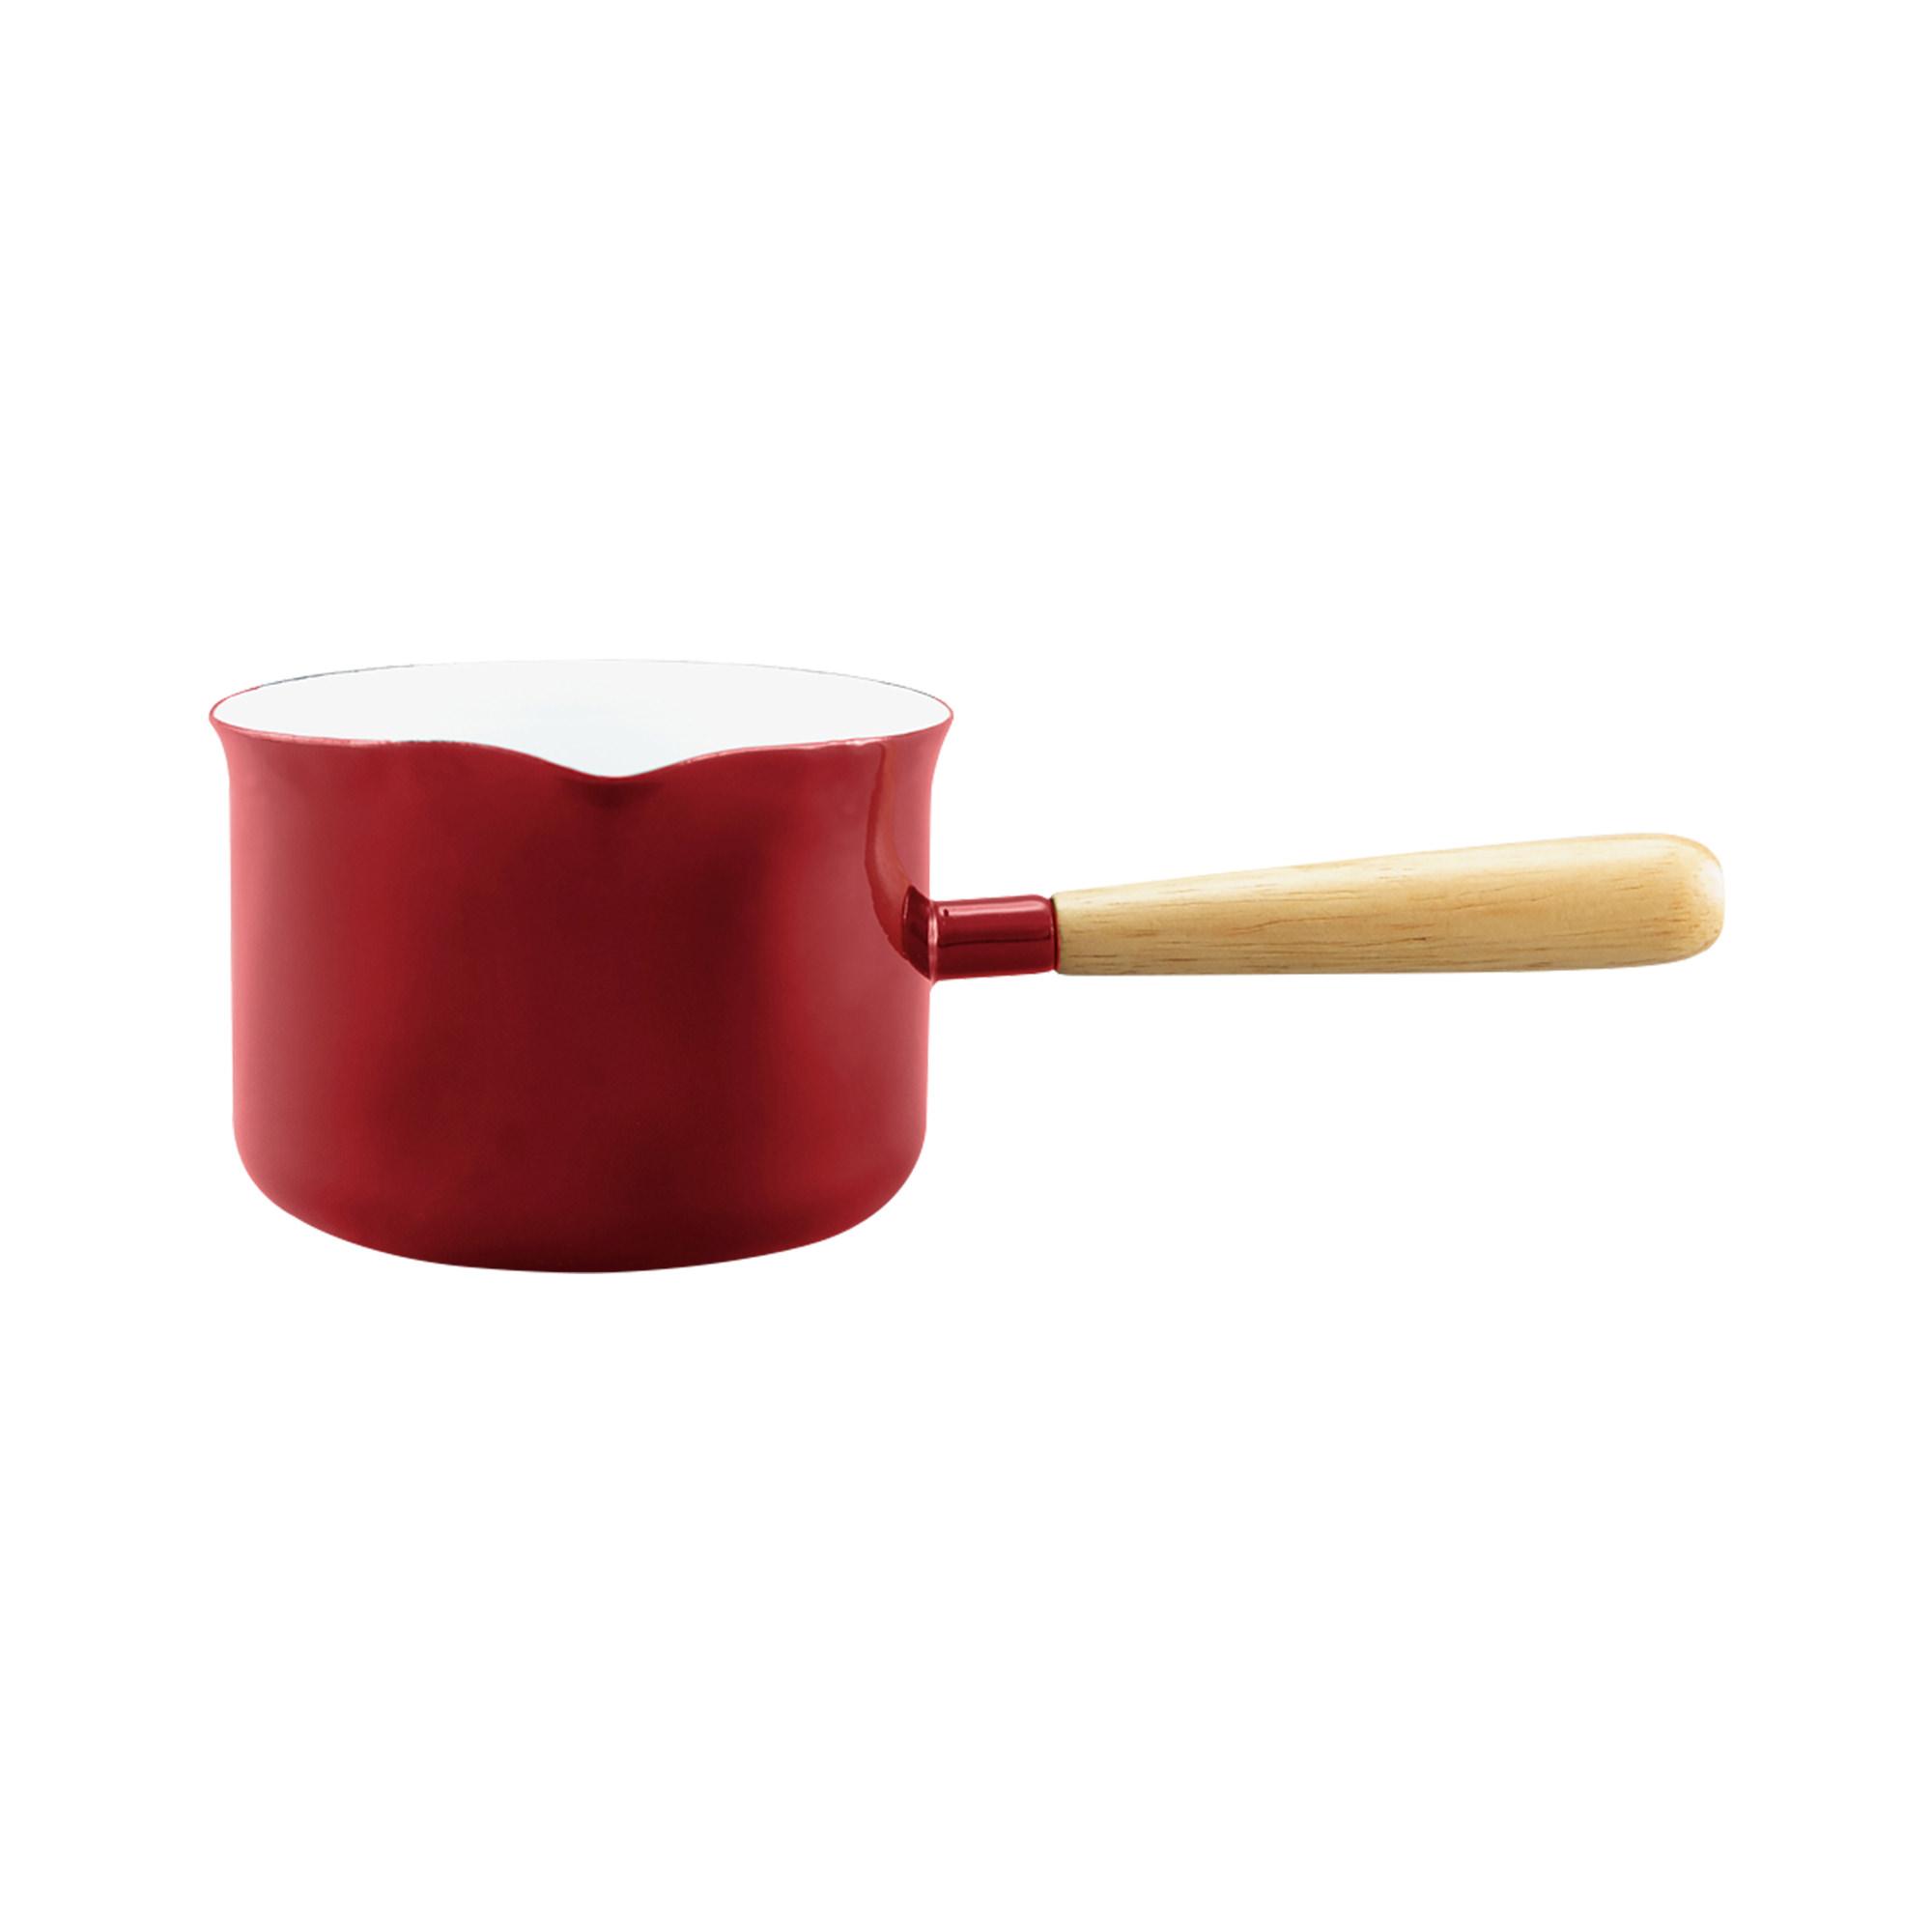 Falcon Enamelware Butter Warmer with Wood Handle 650ml Red Image 1